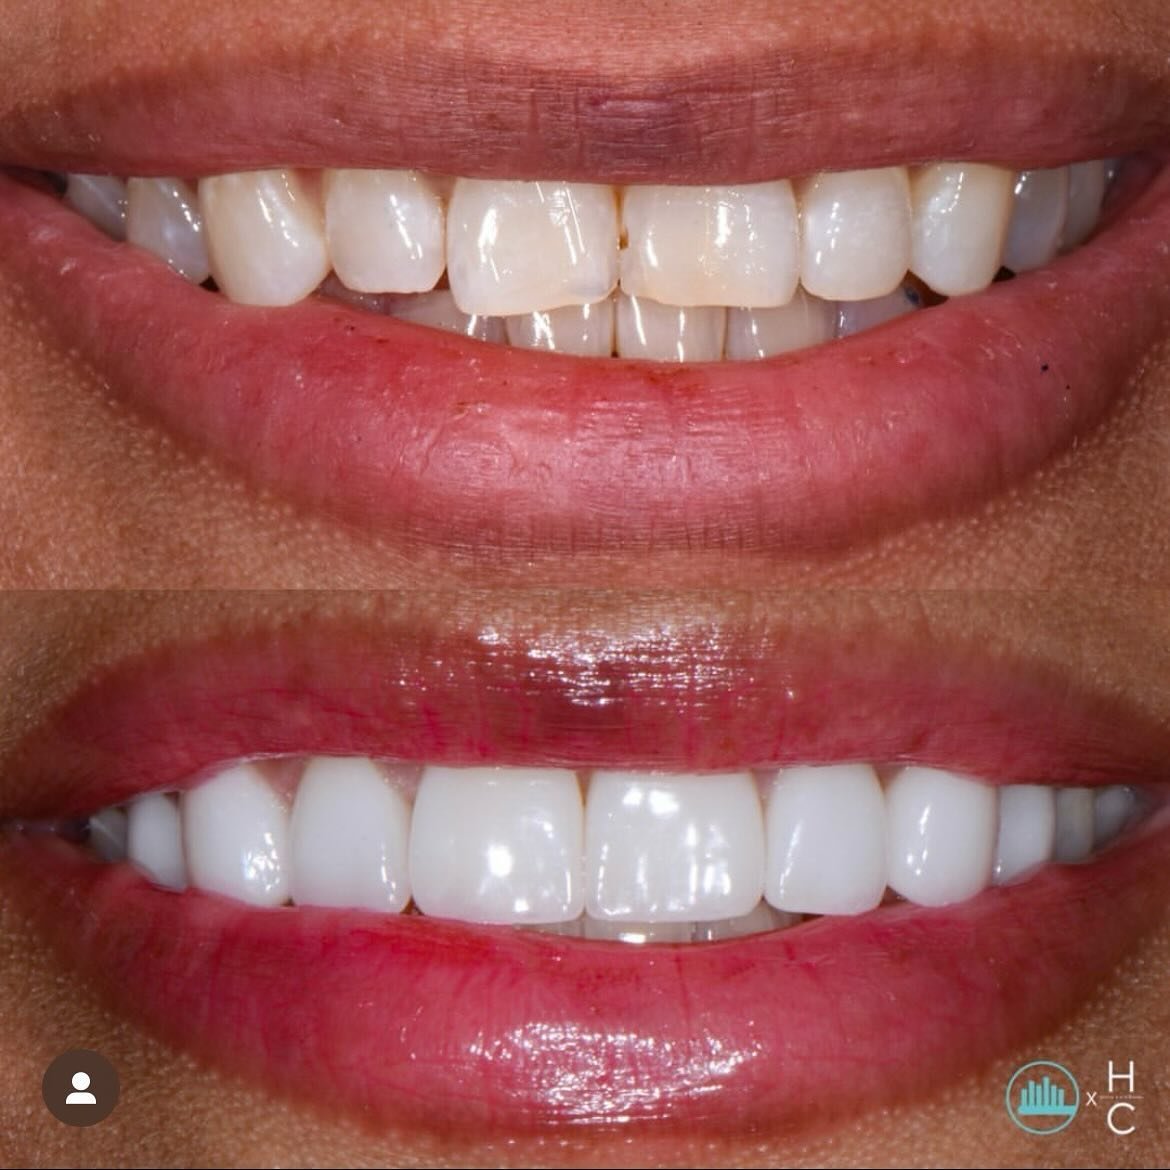 Case Highlight: Natasha 
Natasha had bonding on her front teeth to try to mask a cosmetic issue, but felt that it actually made her teeth look worse. She lived with the bonding for many years before finally deciding it was time for a change. She did 